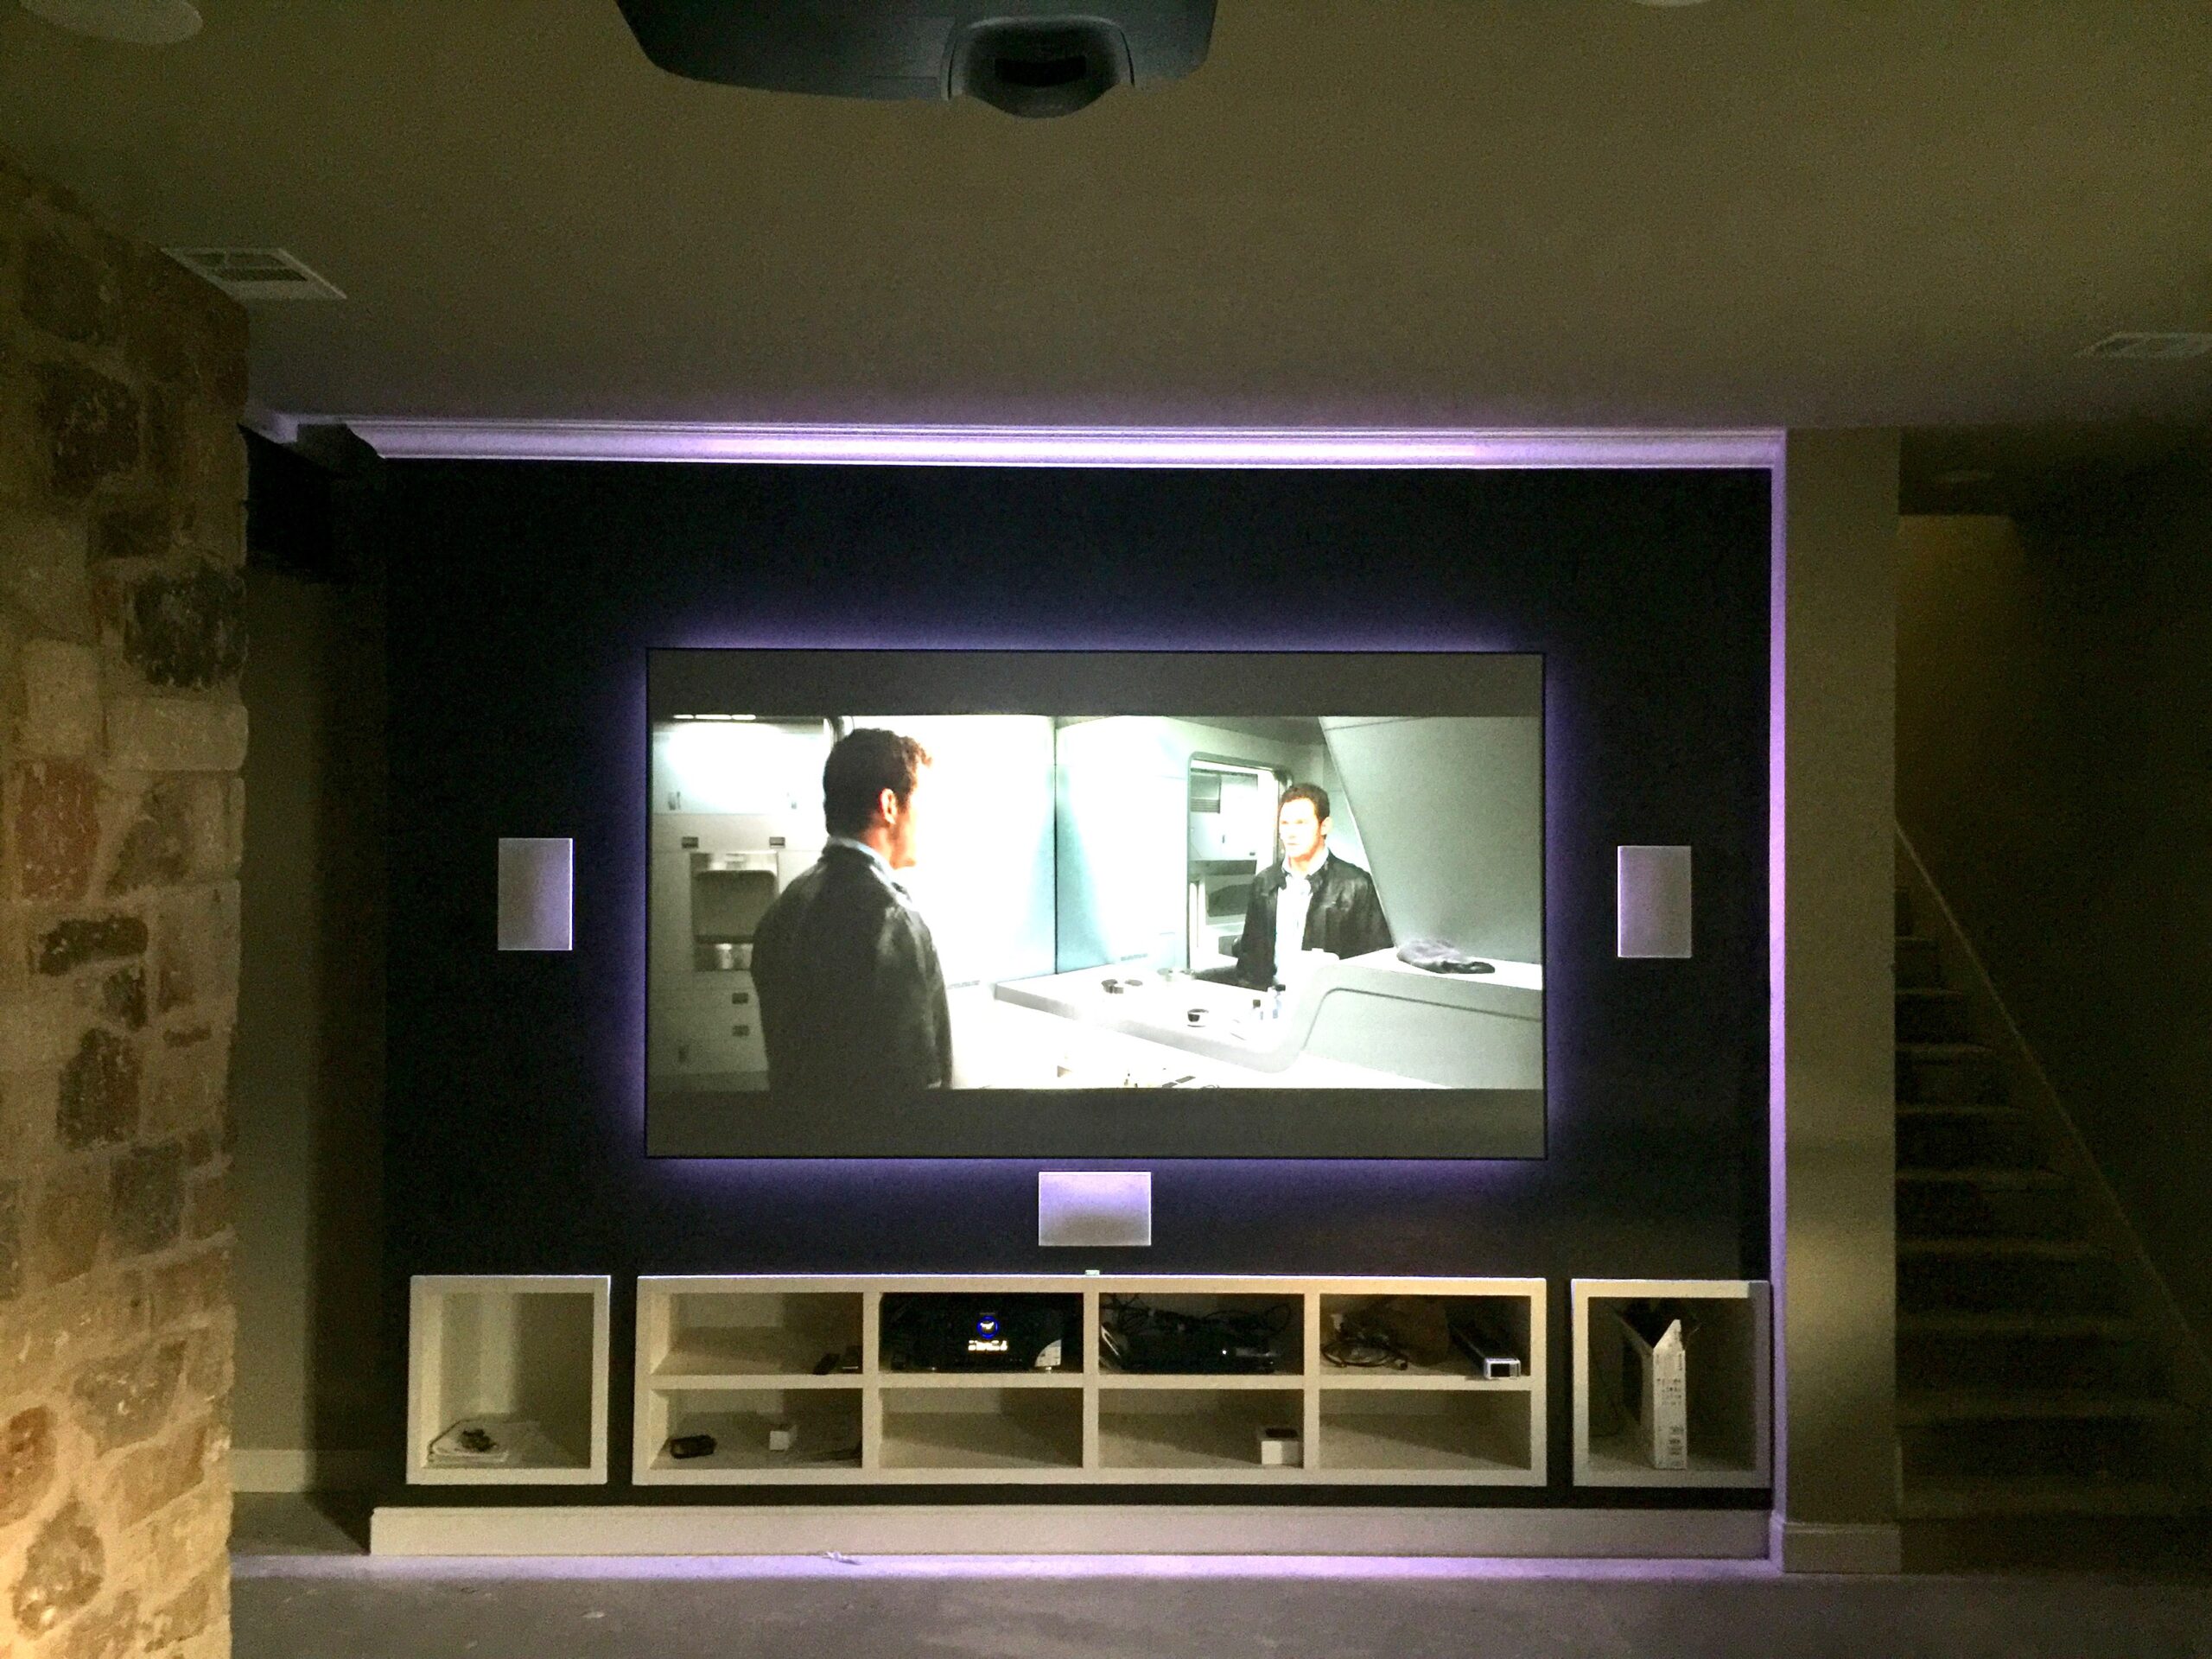 Home theater room with short throw laser projection, hidden pristine sound system and interior theater lighting